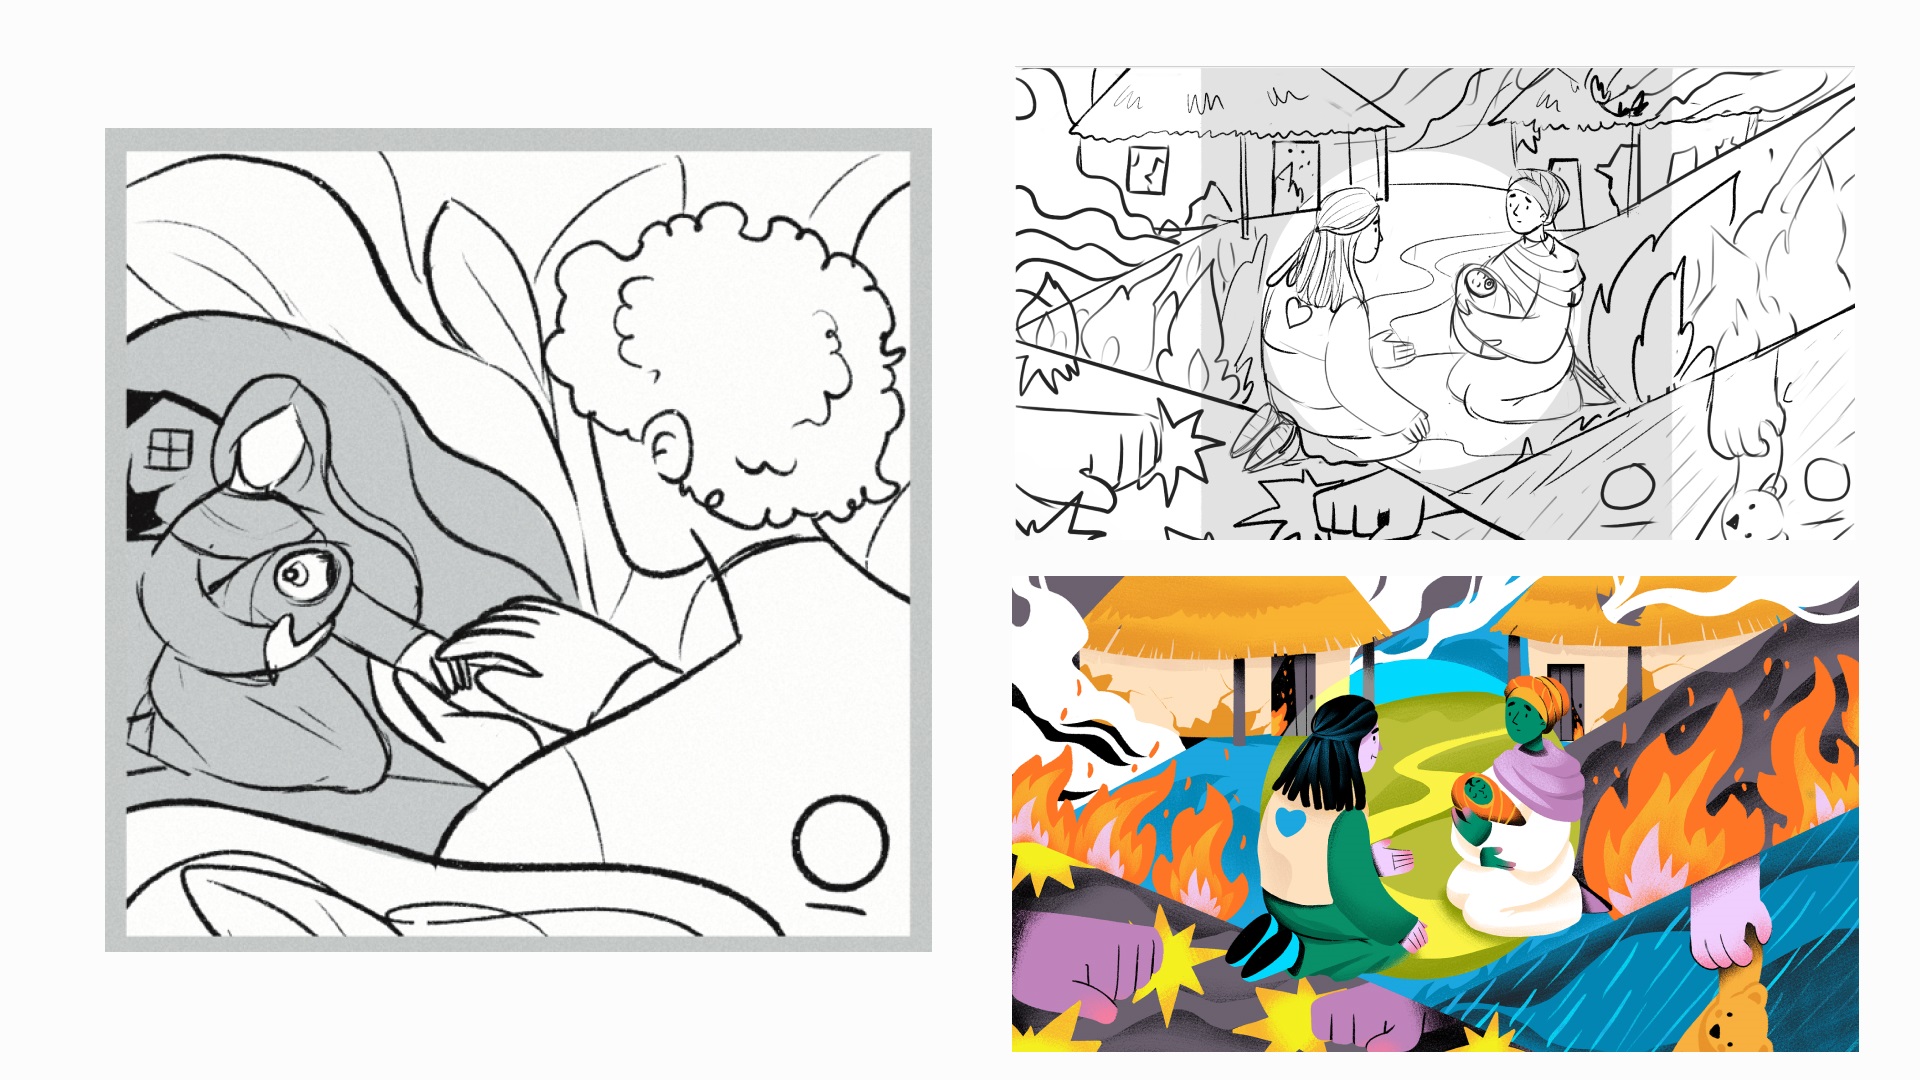 whd councellor illustration process